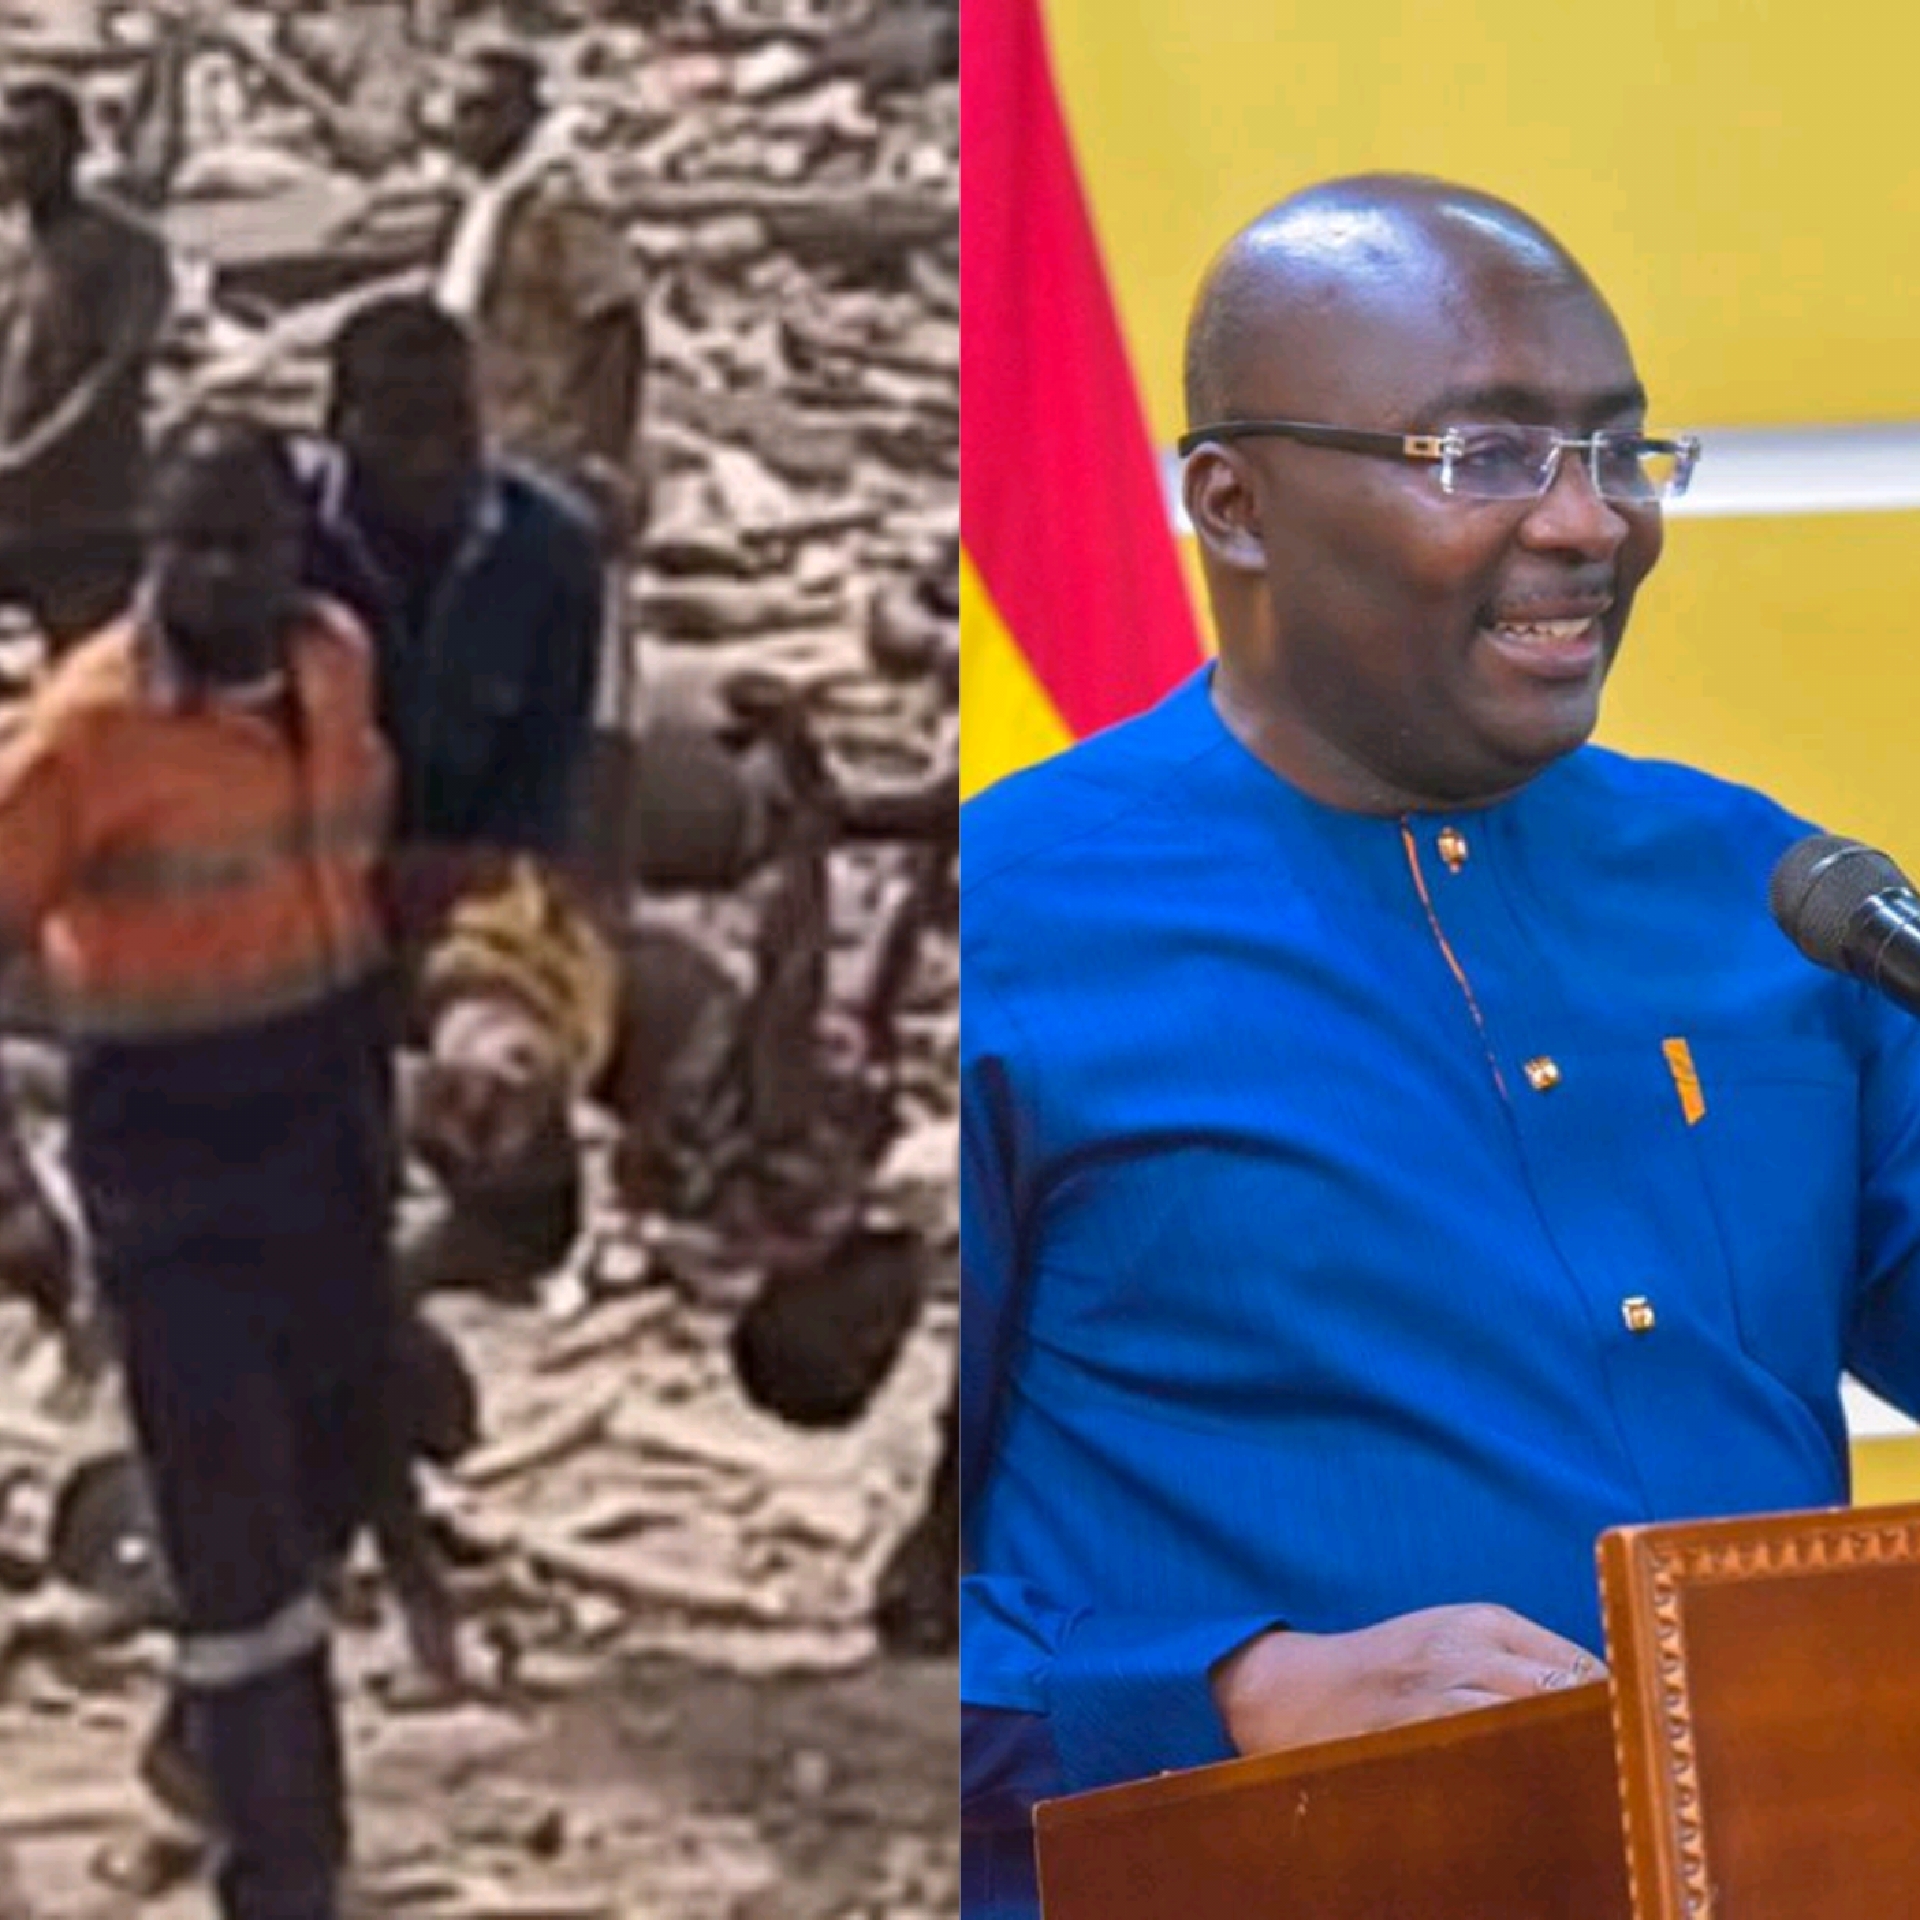 Bogoso Explosion: Vice President Bawumia Leads Delegation To Ascertain State Affairs After Gas Explosion